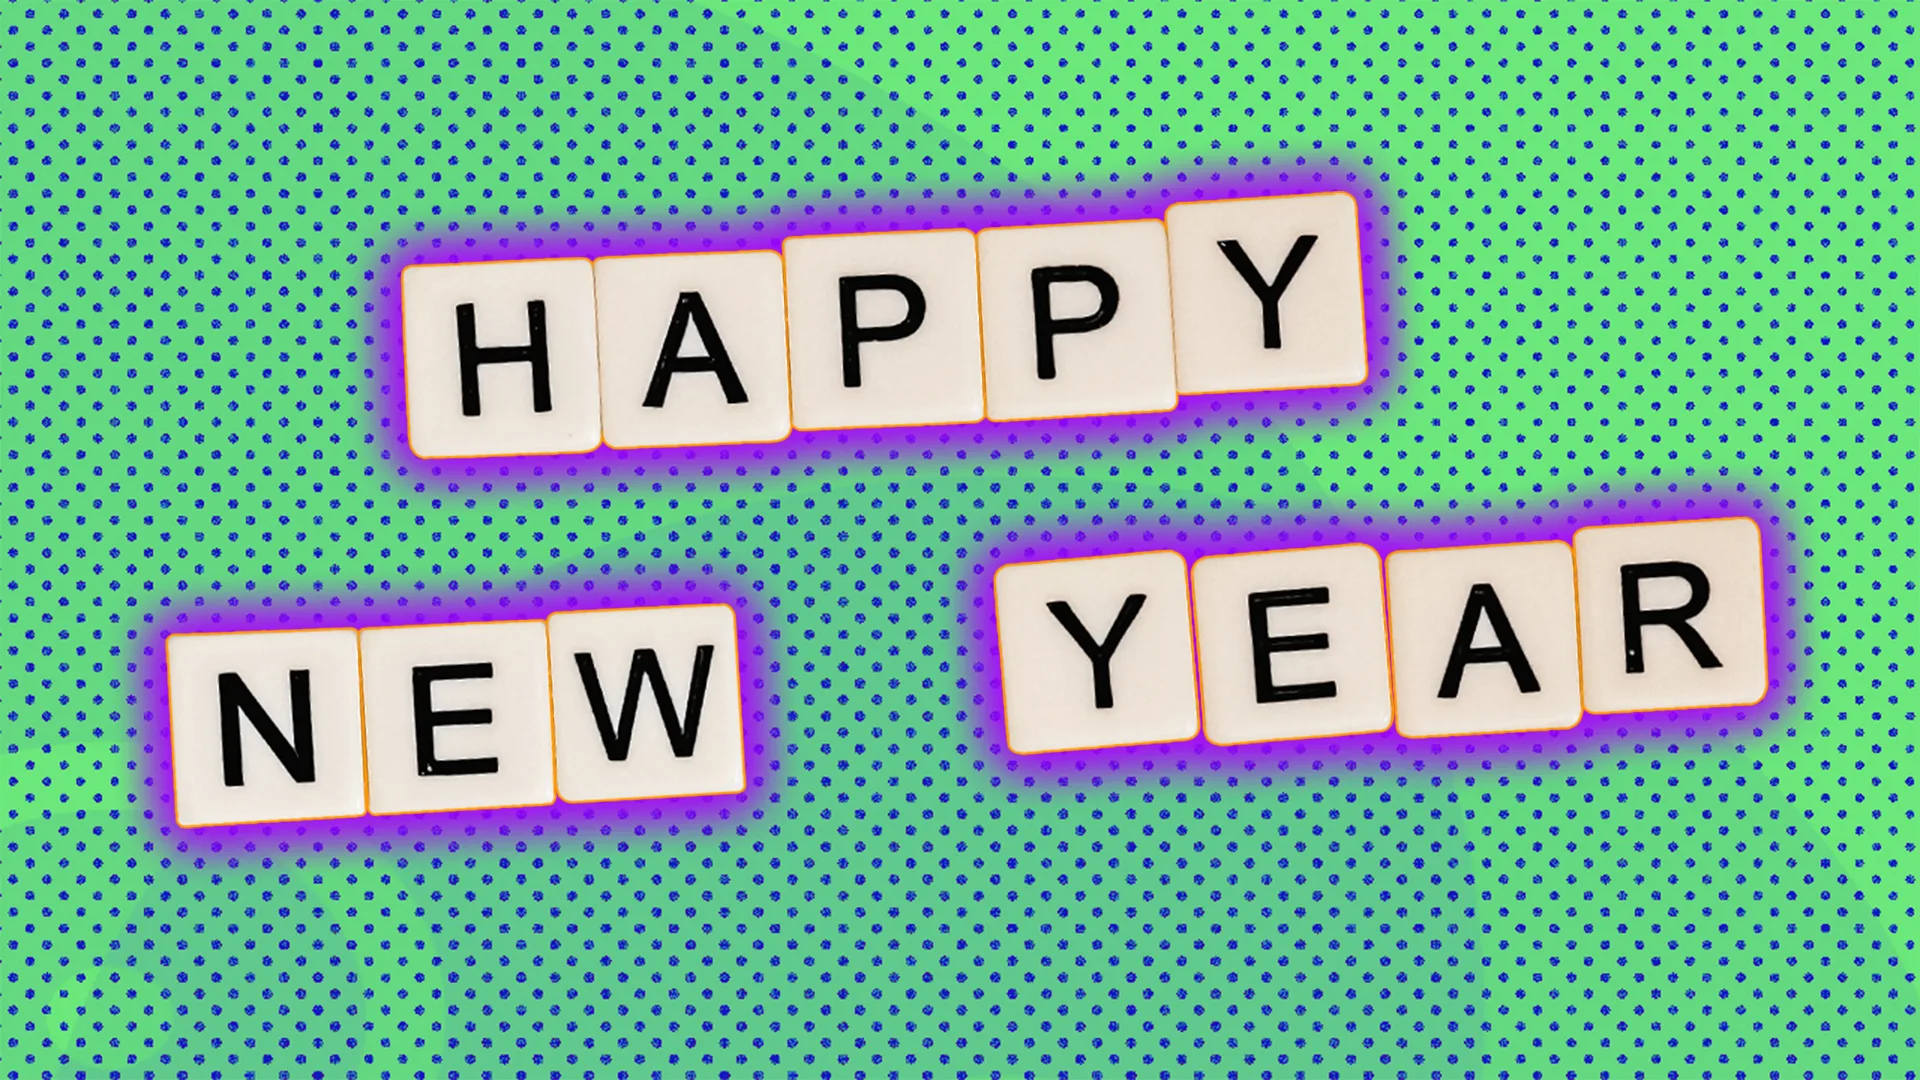 Happy New Year sign, outlined by purple halo effect on green background dotted with blue.